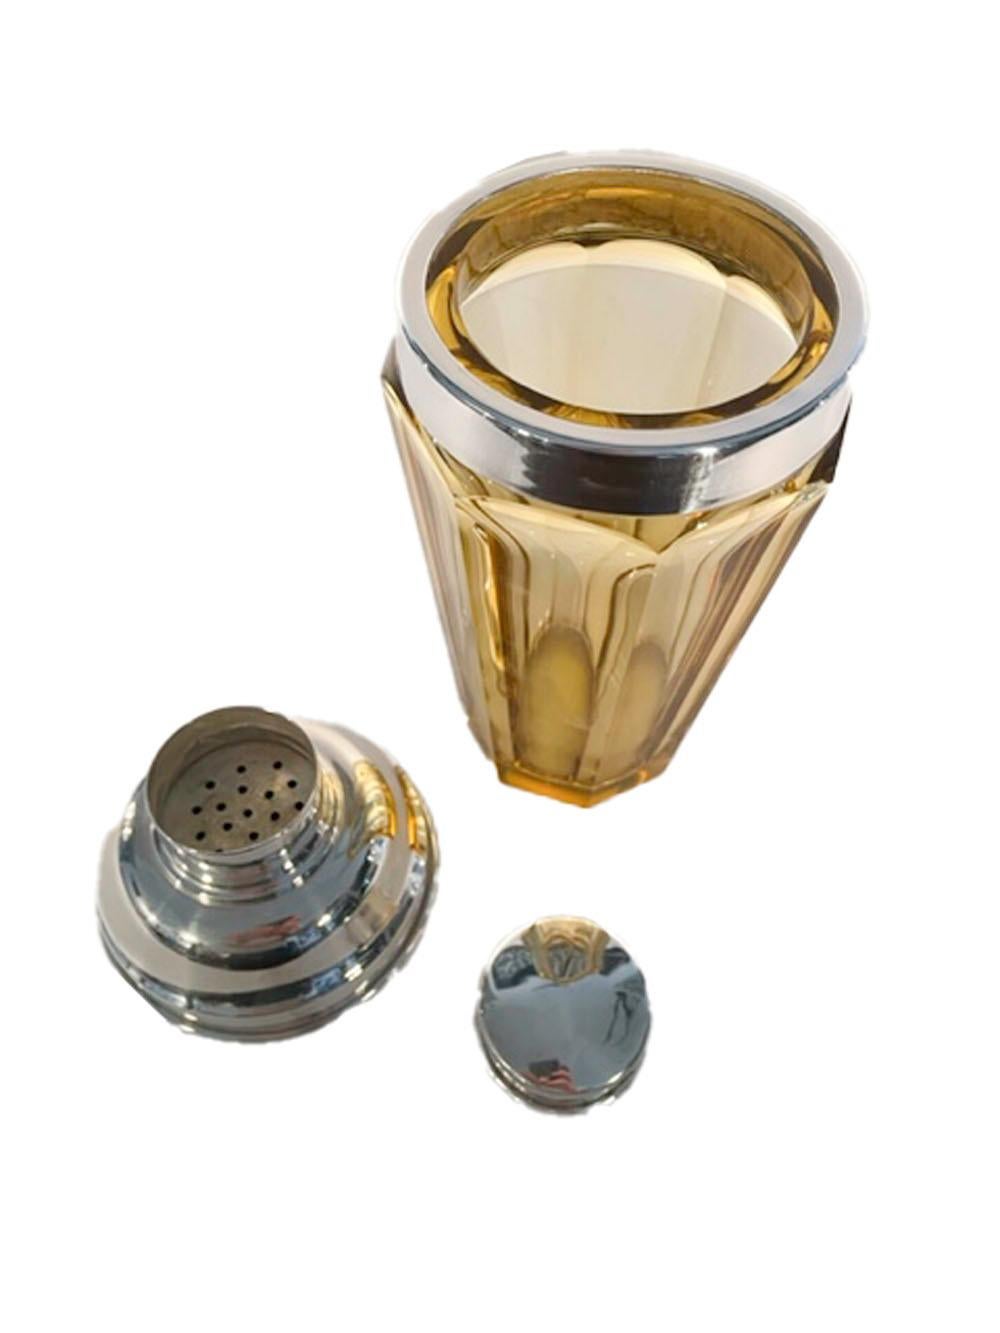 Art Deco cocktail shaker of amber colored glass with 8 polished sides and topped with a silver-plated, center-pour cover.